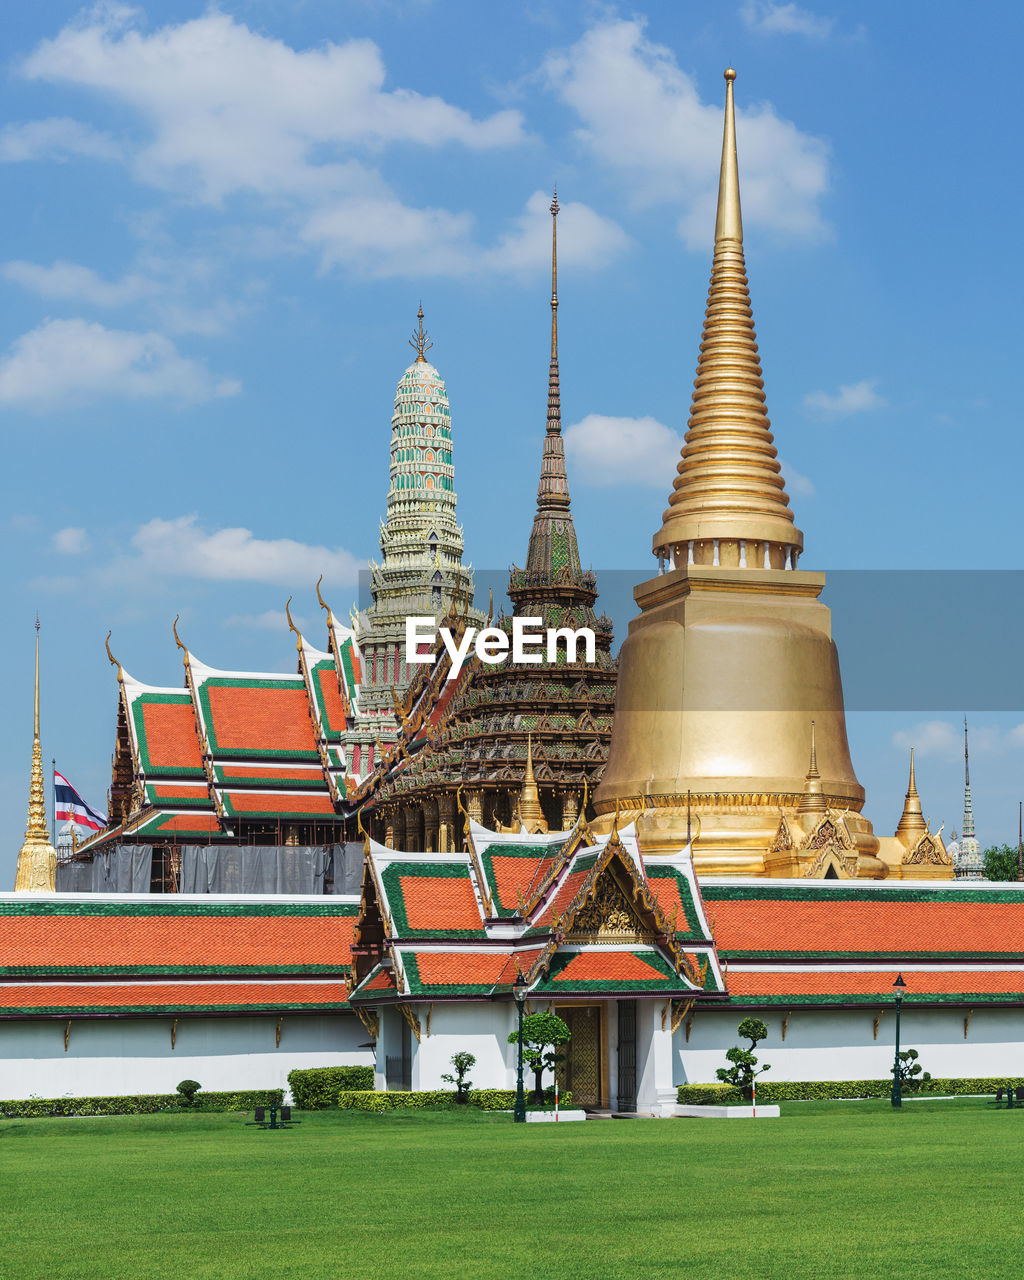 The grand palace is a complex of buildings at the heart of bangkok, thailand.